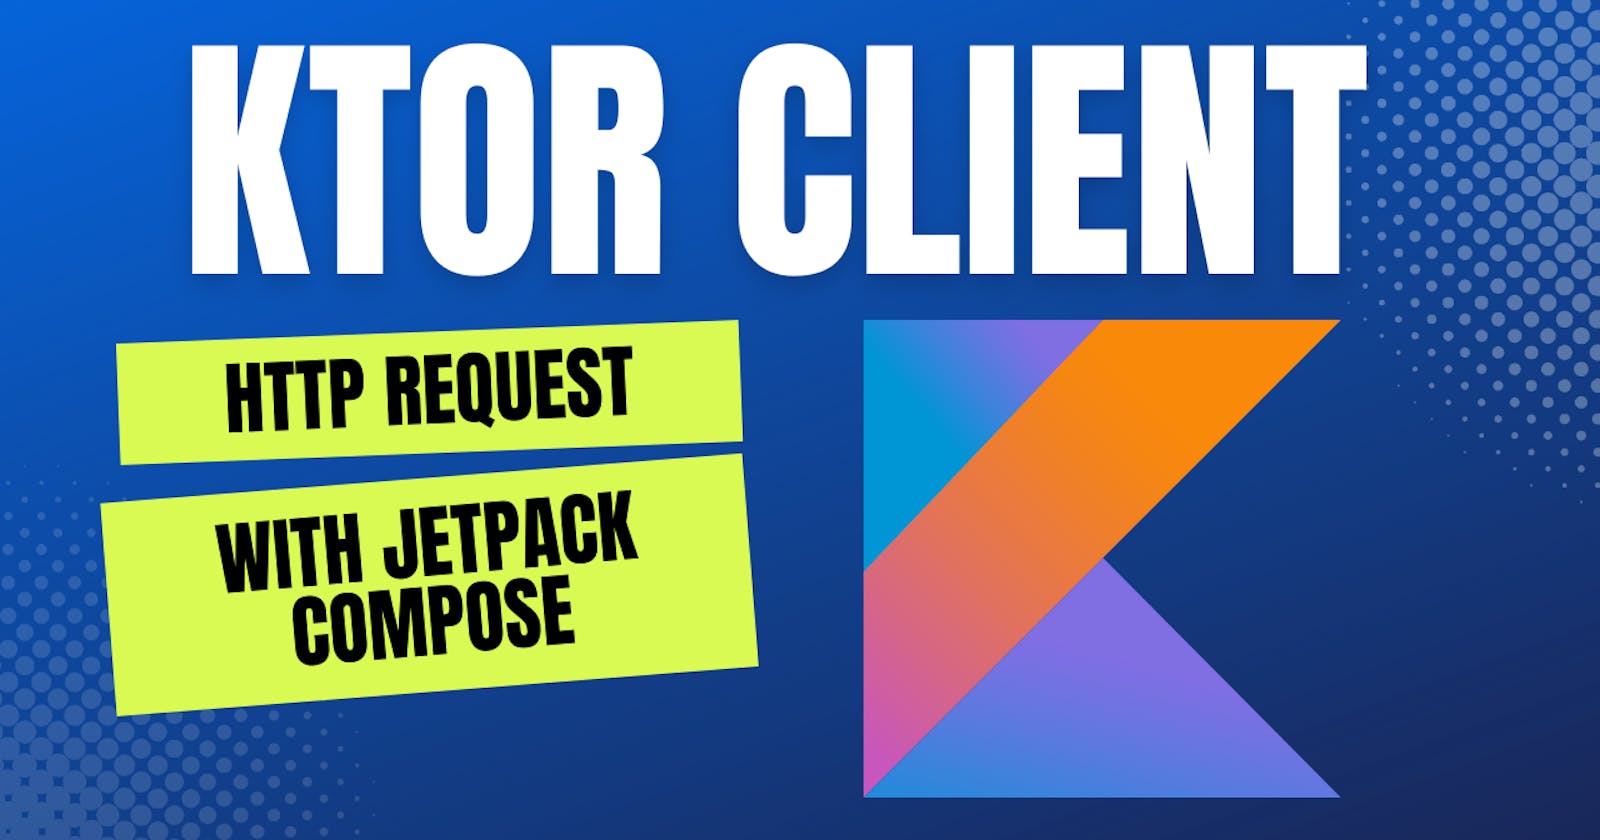 Http Request with Ktor-client, Jetpack Compose Android project example